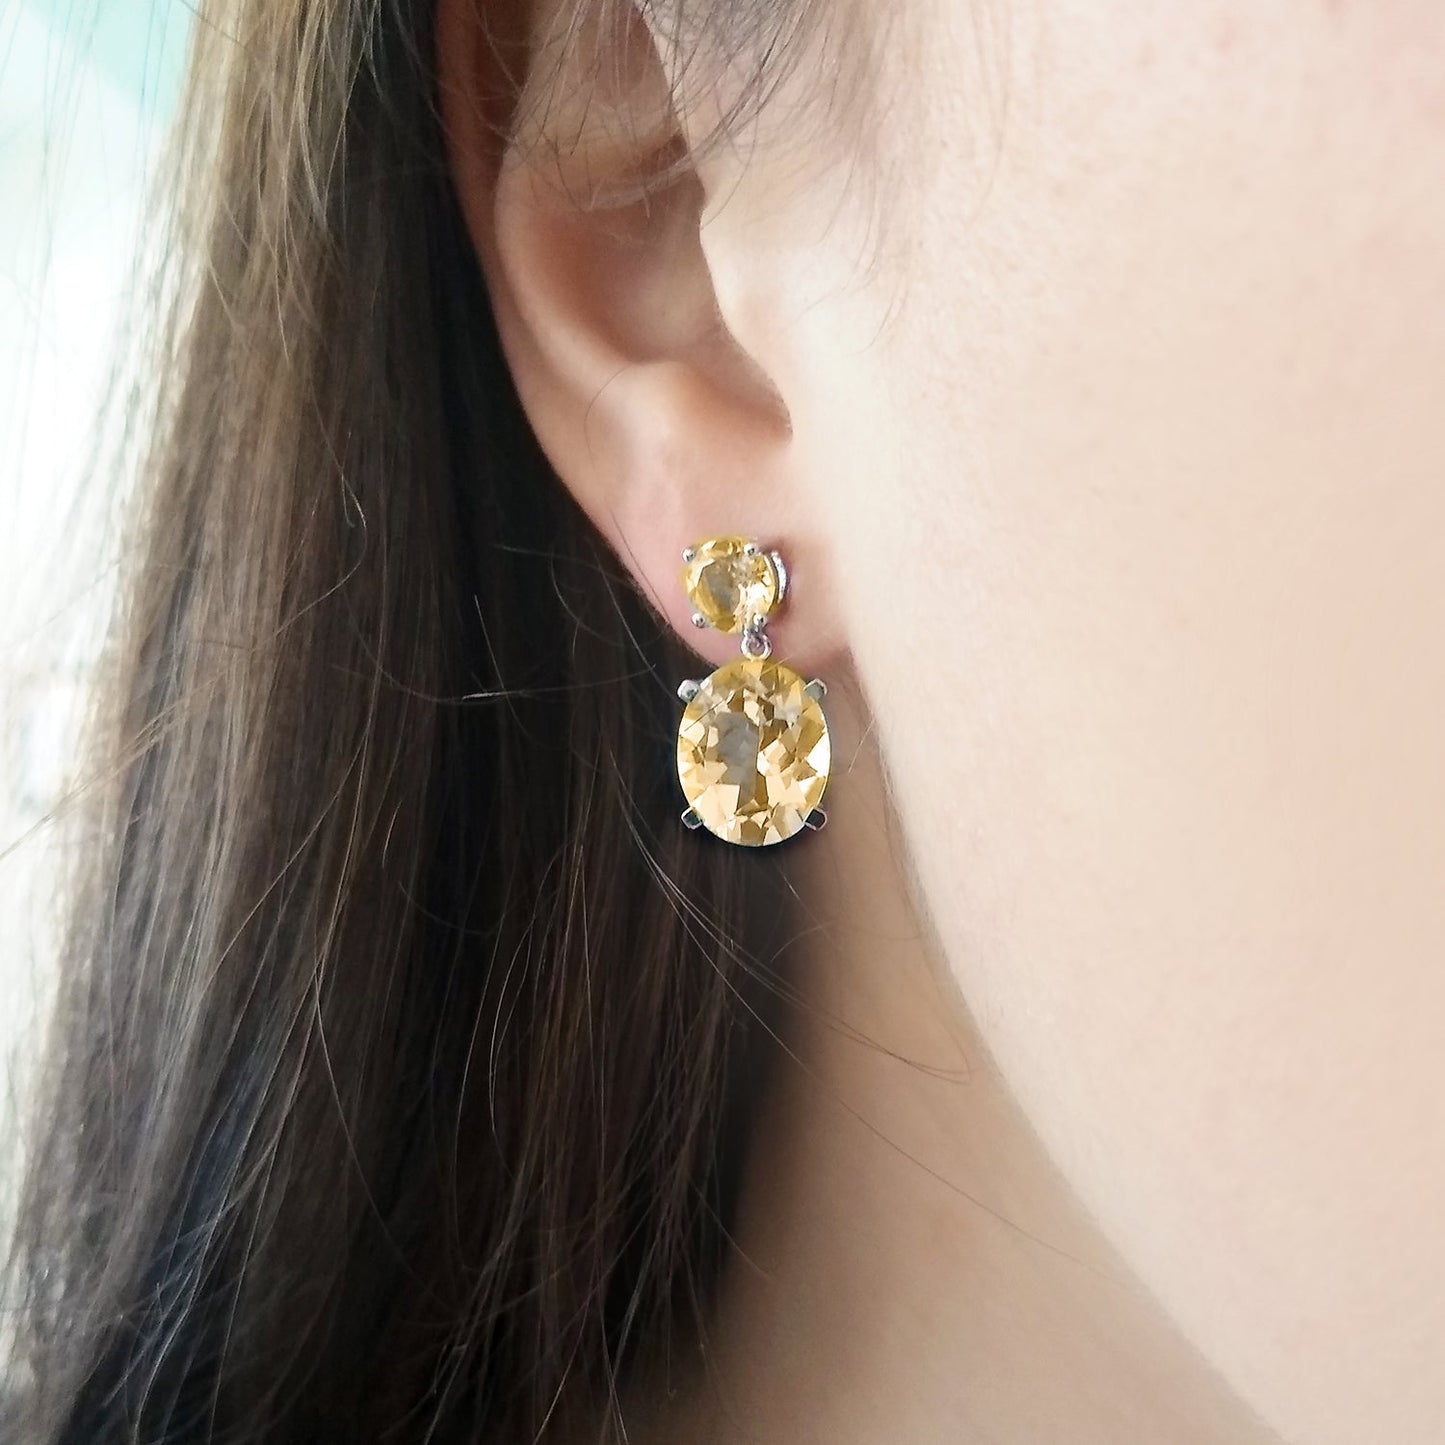 Citrine Drop Earrings | The South of France Collection | Augustine Jewels | Gemstone Earrings